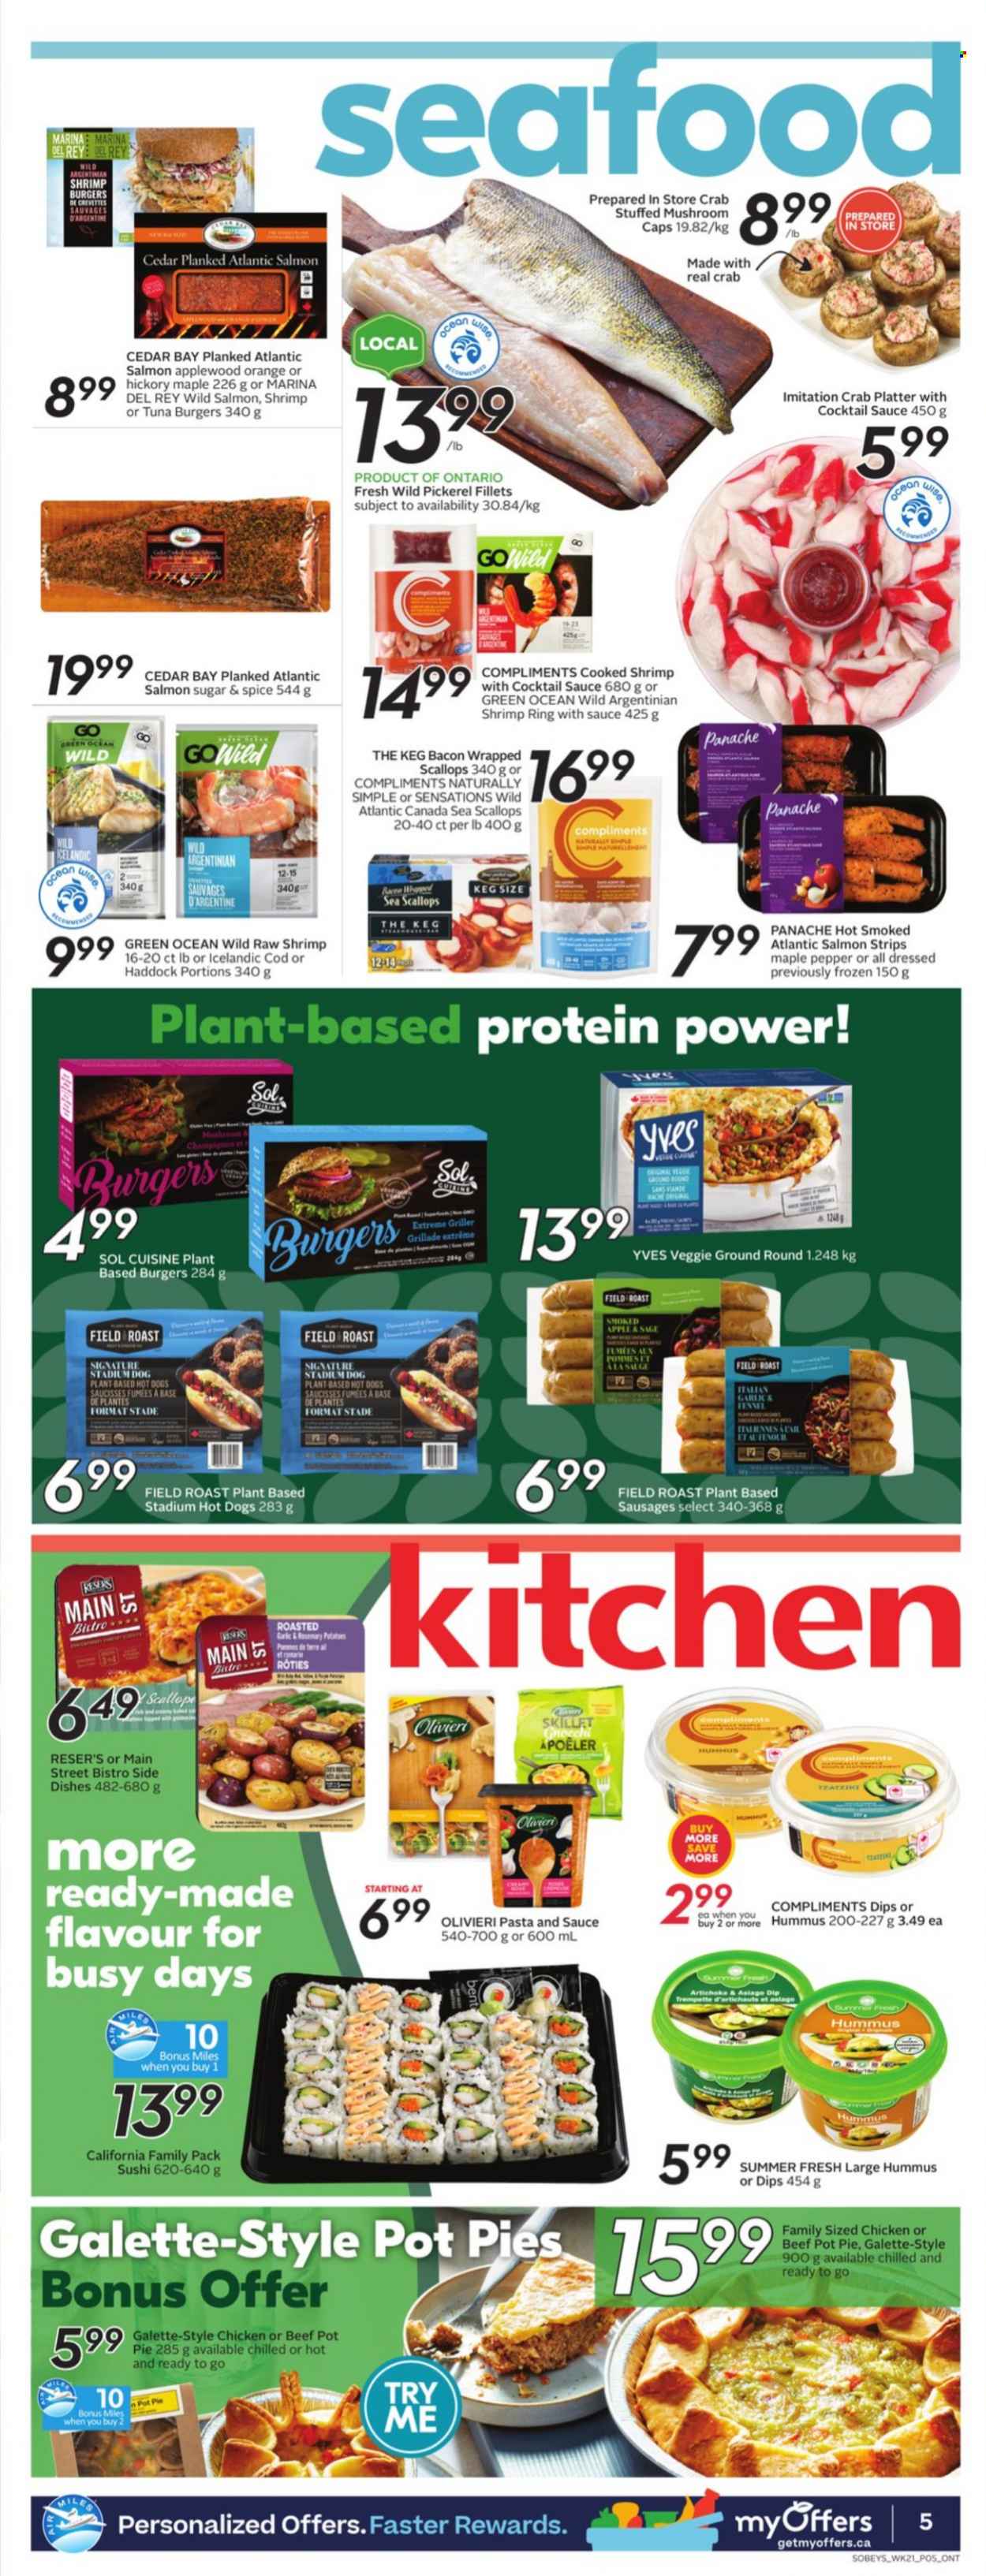 thumbnail - Sobeys Flyer - September 16, 2021 - September 22, 2021 - Sales products - pie, pot pie, artichoke, garlic, bacon wrapped scallops, cod, salmon, scallops, tuna, haddock, seafood, crab, shrimps, walleye, hot dog, hamburger, pasta, bacon, sausage, hummus, asiago, dip, strips, sugar, fennel, pepper, spice, cocktail sauce, Sol, oranges. Page 6.